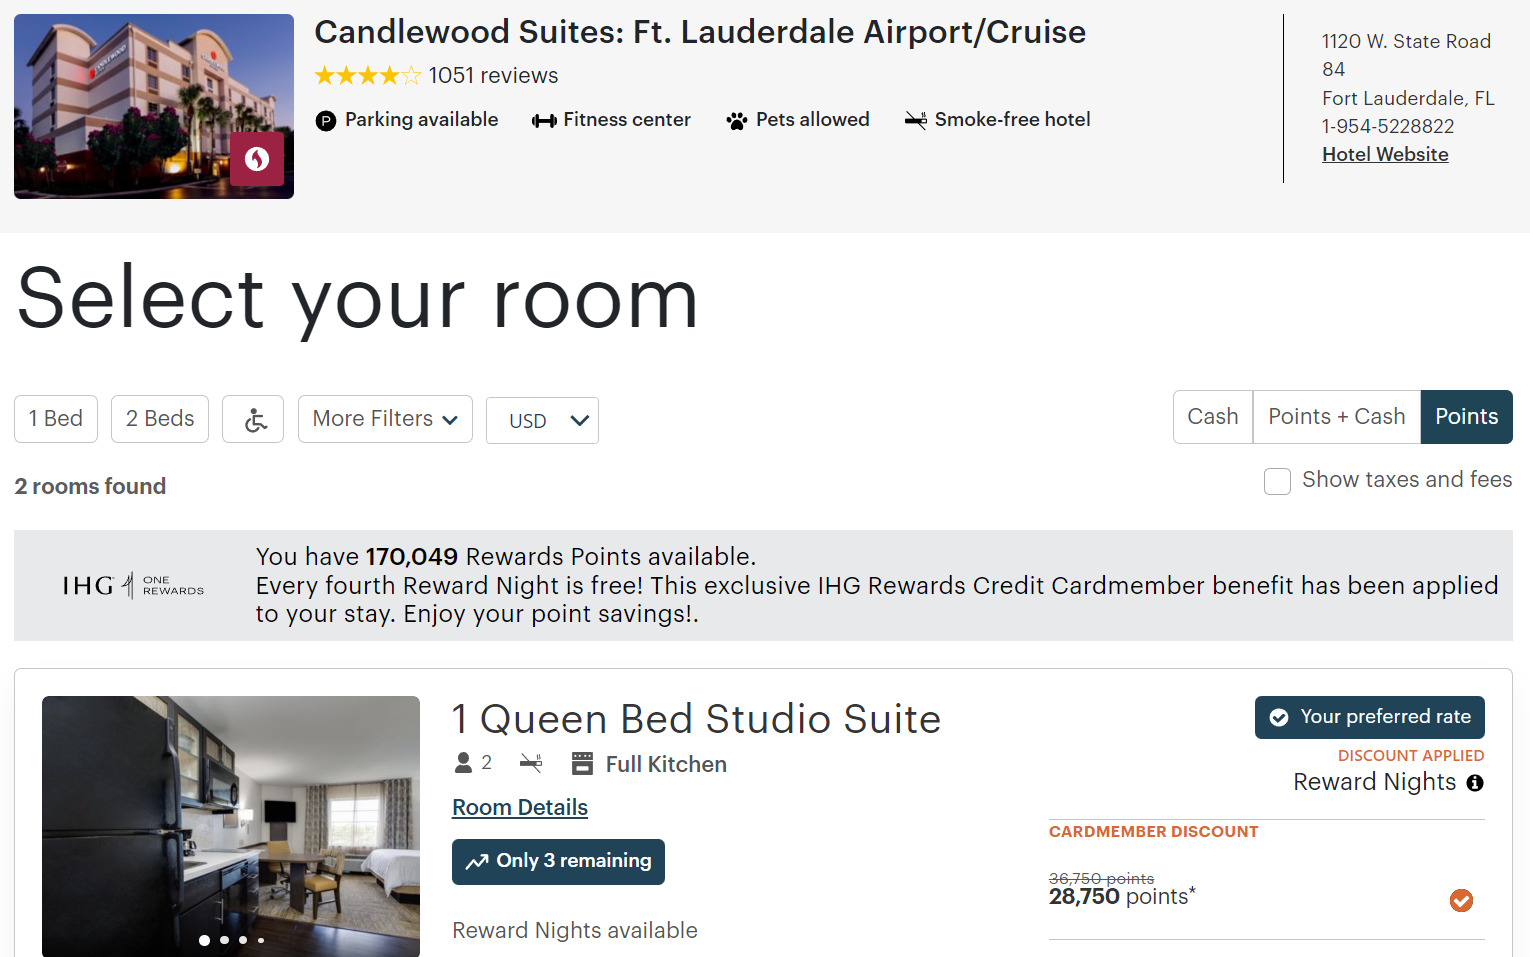 Screenshot showing IHG card discount at a Candlewood Suites property in Fort Lauderdale, Florida.